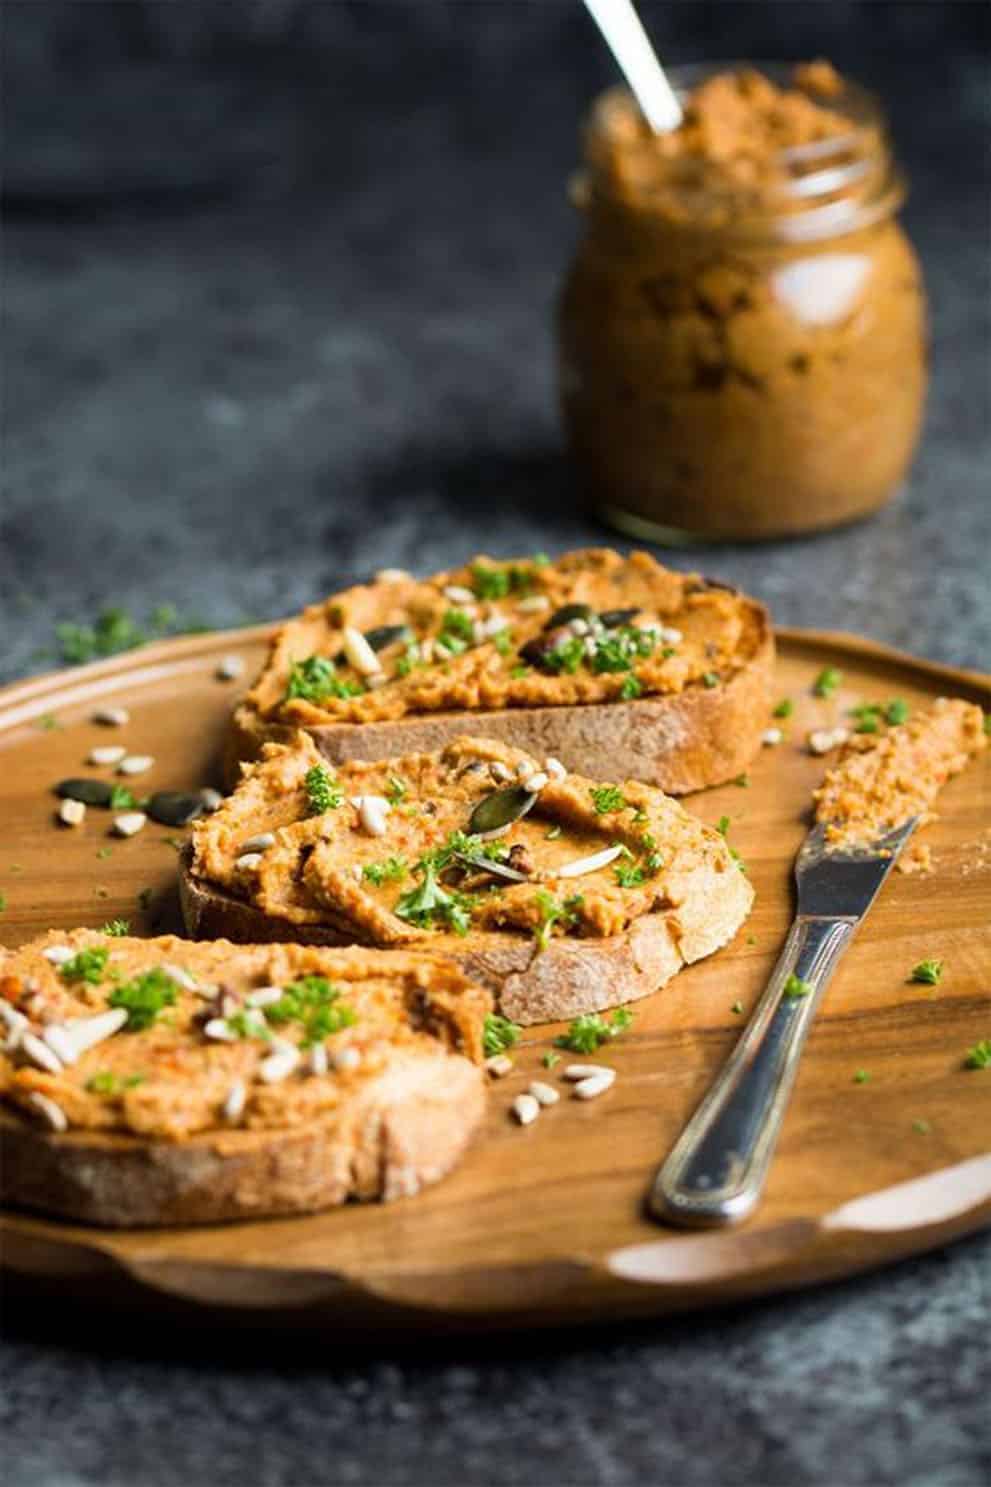 Slices of bread with vegan pate' on a round wooden plate - Lauren Caris Cooks